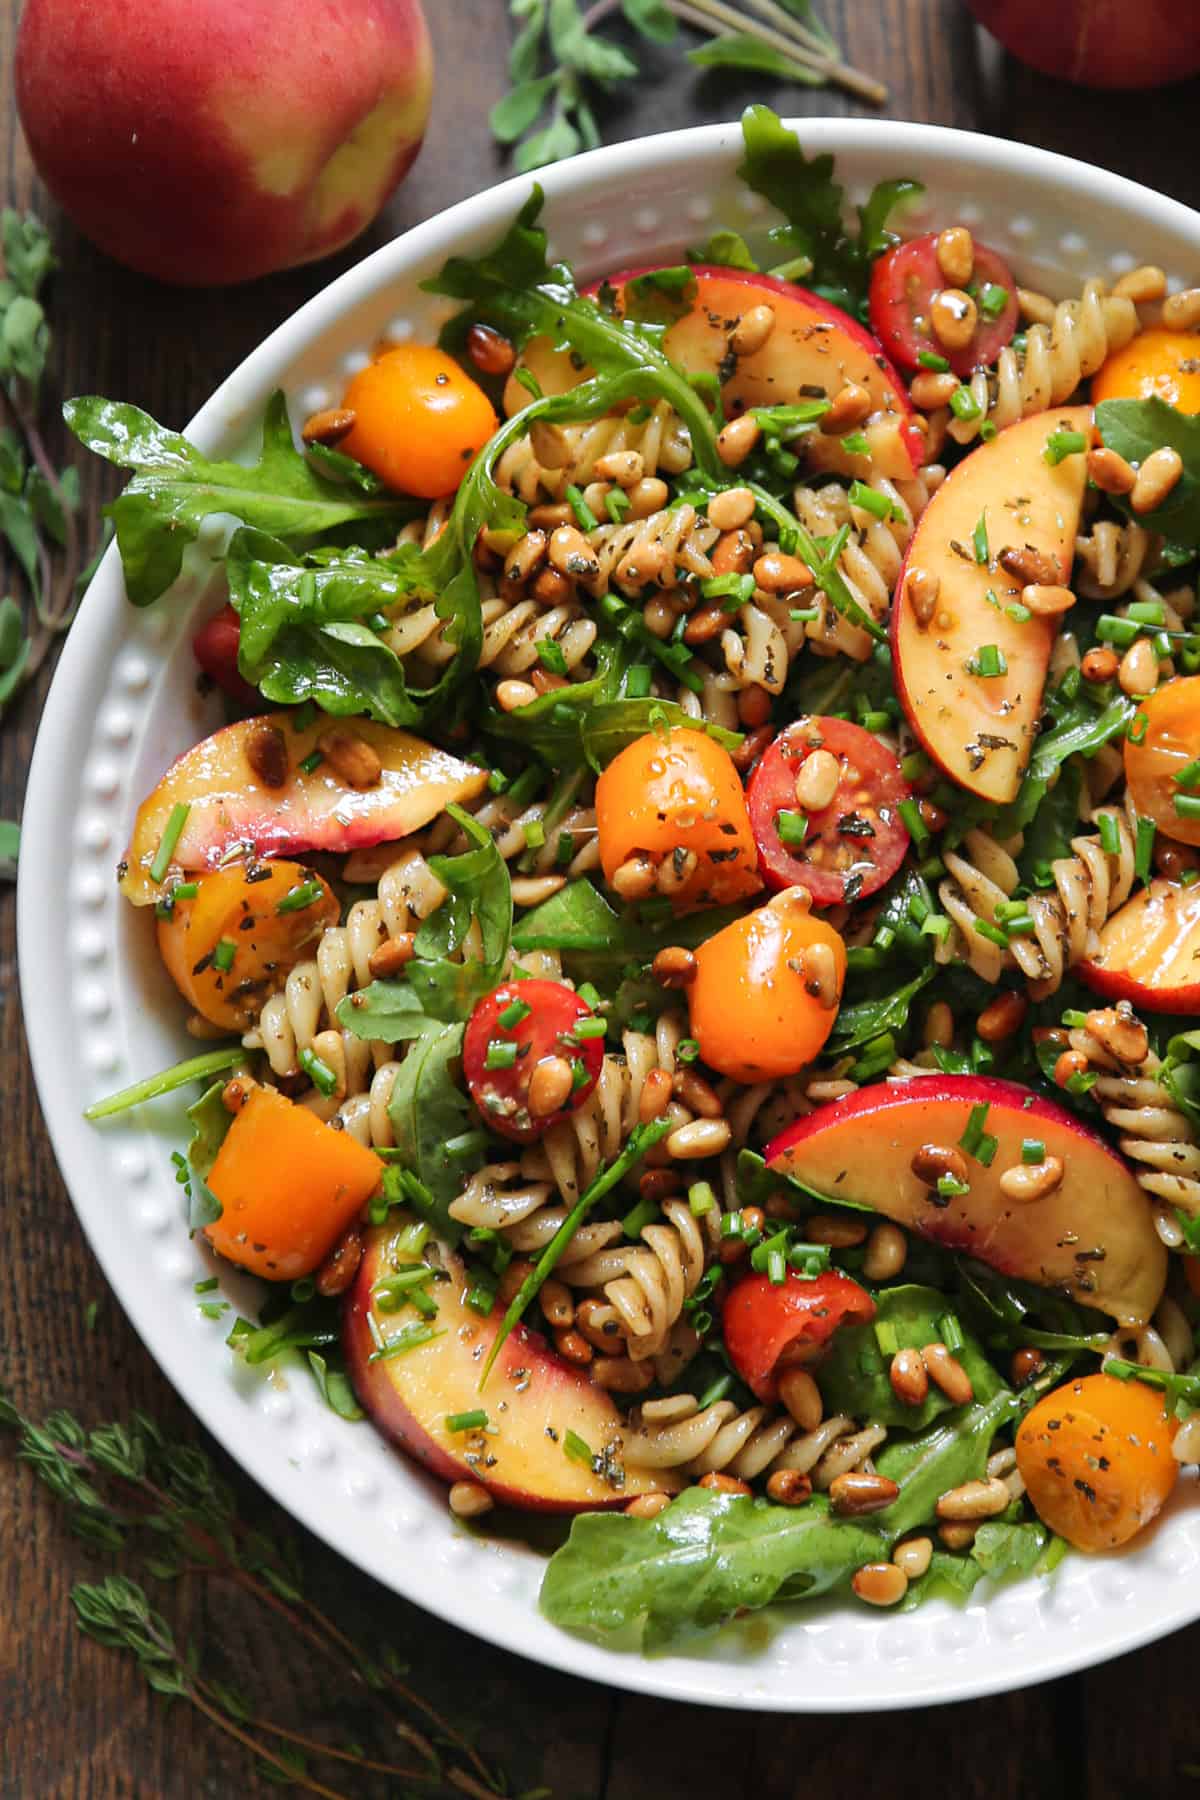 Peach Pasta Salad with Arugula, Tomatoes, and Pine Nuts in a bowl